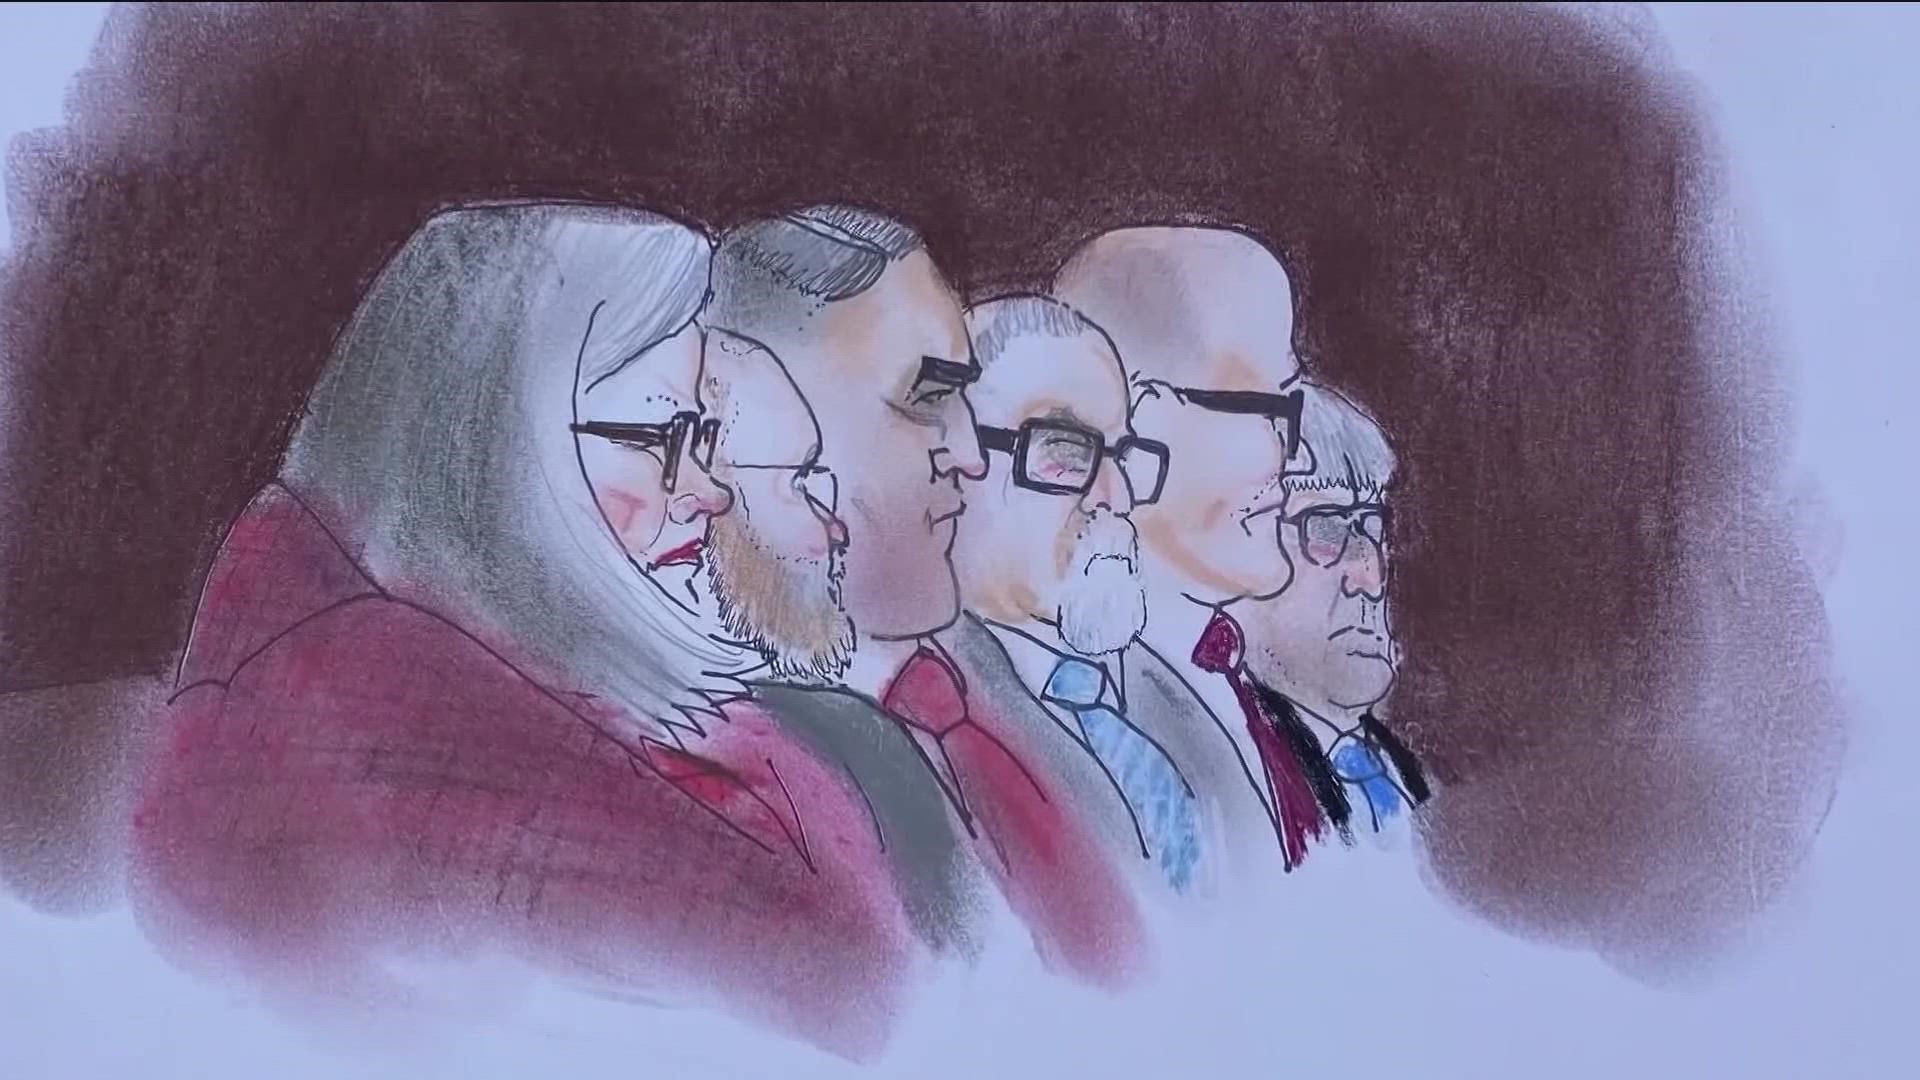 The federal hate crimes trial started Monday.